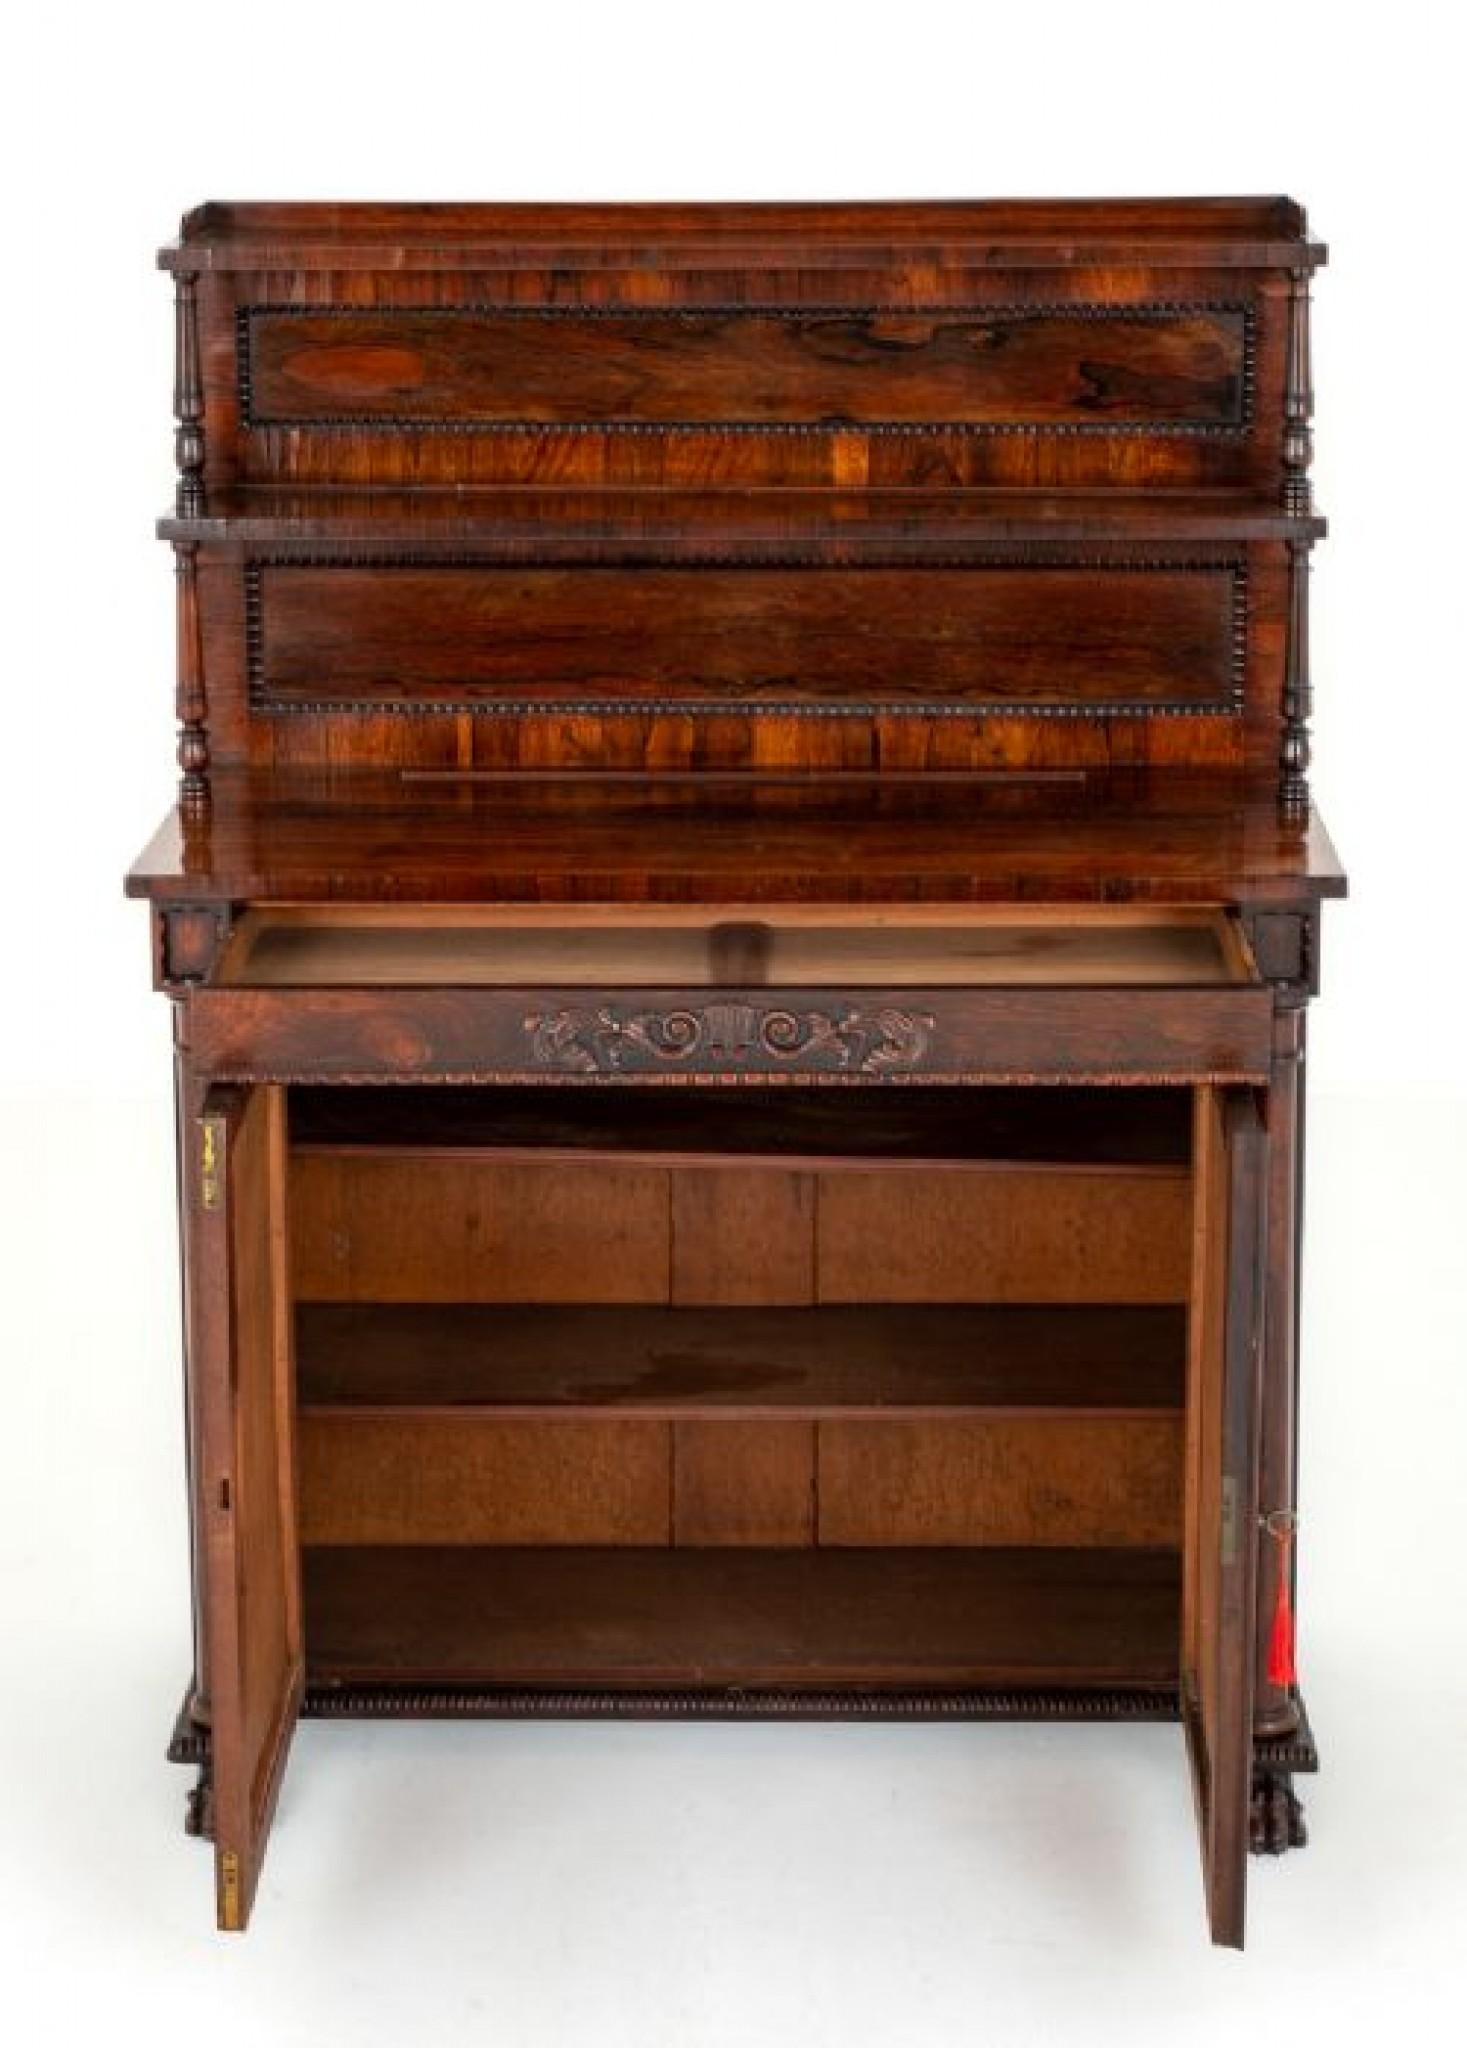 Rosewood Regency Chiffonier Sideboard Chest Period Antiques For Sale